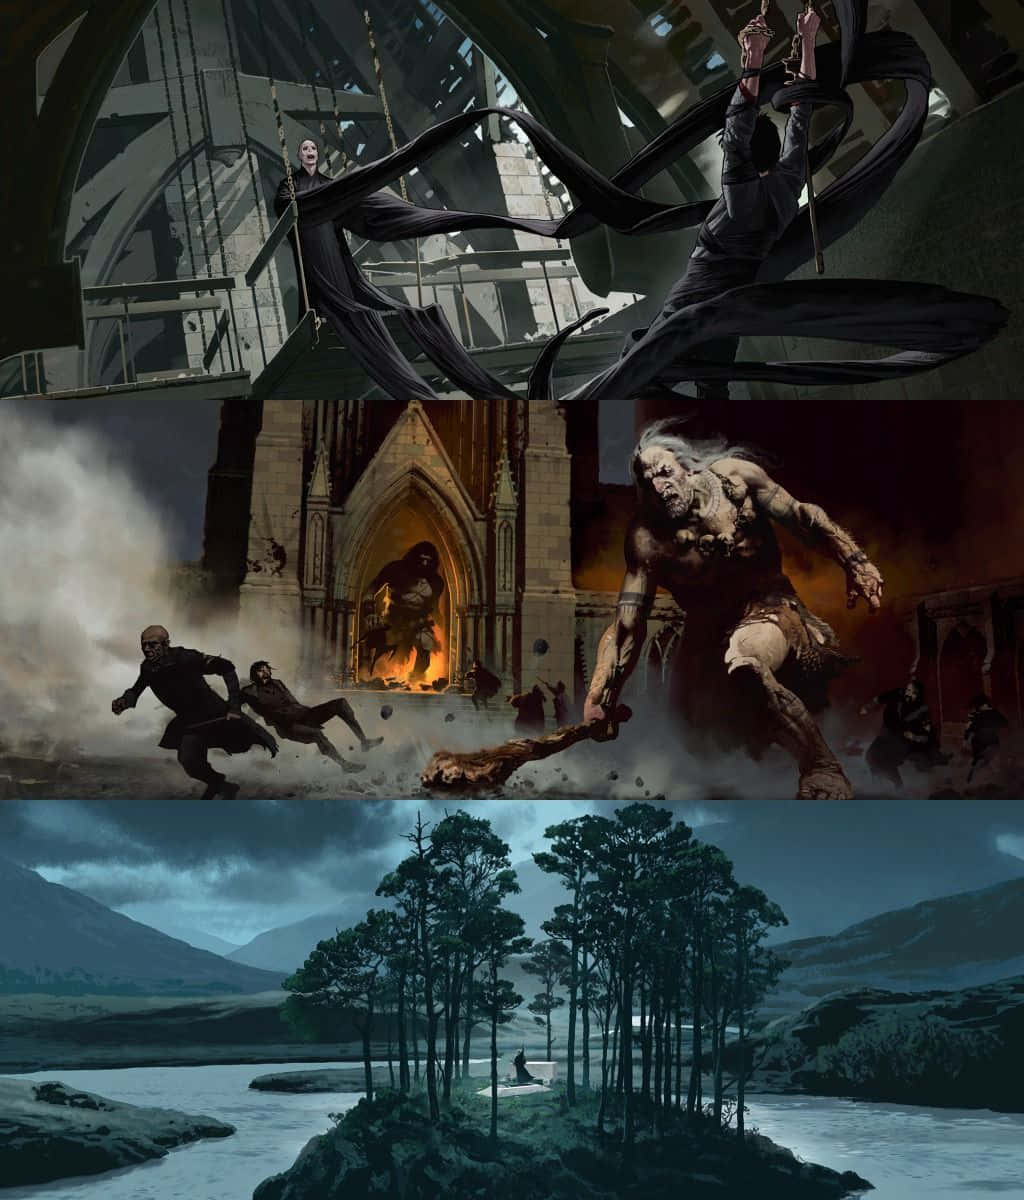 The Battle of Hogwarts - A Moment of Bravery and Sacrifice Wallpaper